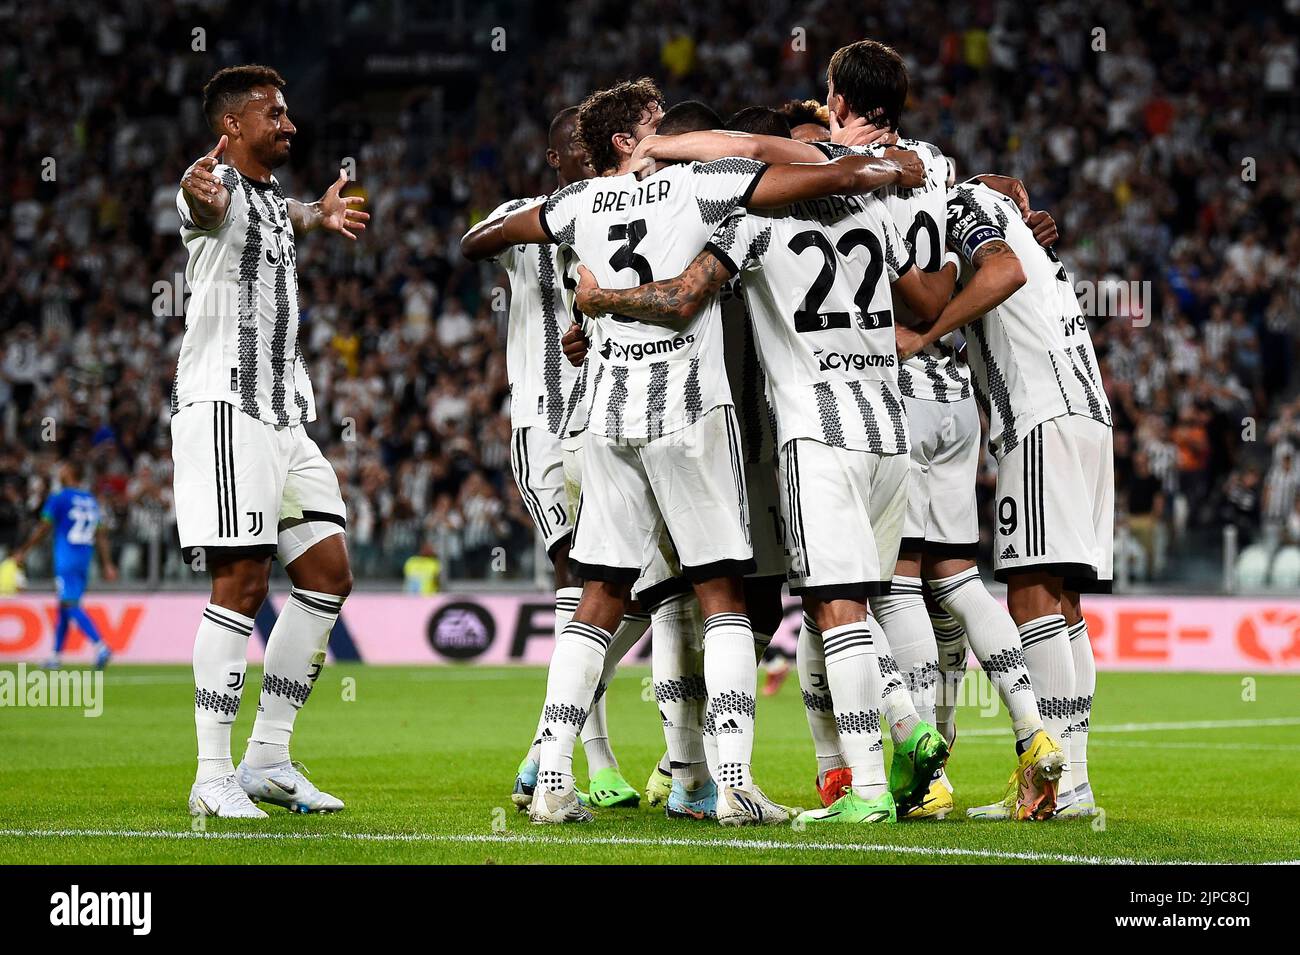 Turin, Italy. 15 August 2022. Dusan Vlahovic of Juventus FC celebrates with his teammates after scoring a goal from a penalty kick during the Serie A football match between Juventus FC and US Sassuolo. Credit: Nicolò Campo/Alamy Live News Stock Photo